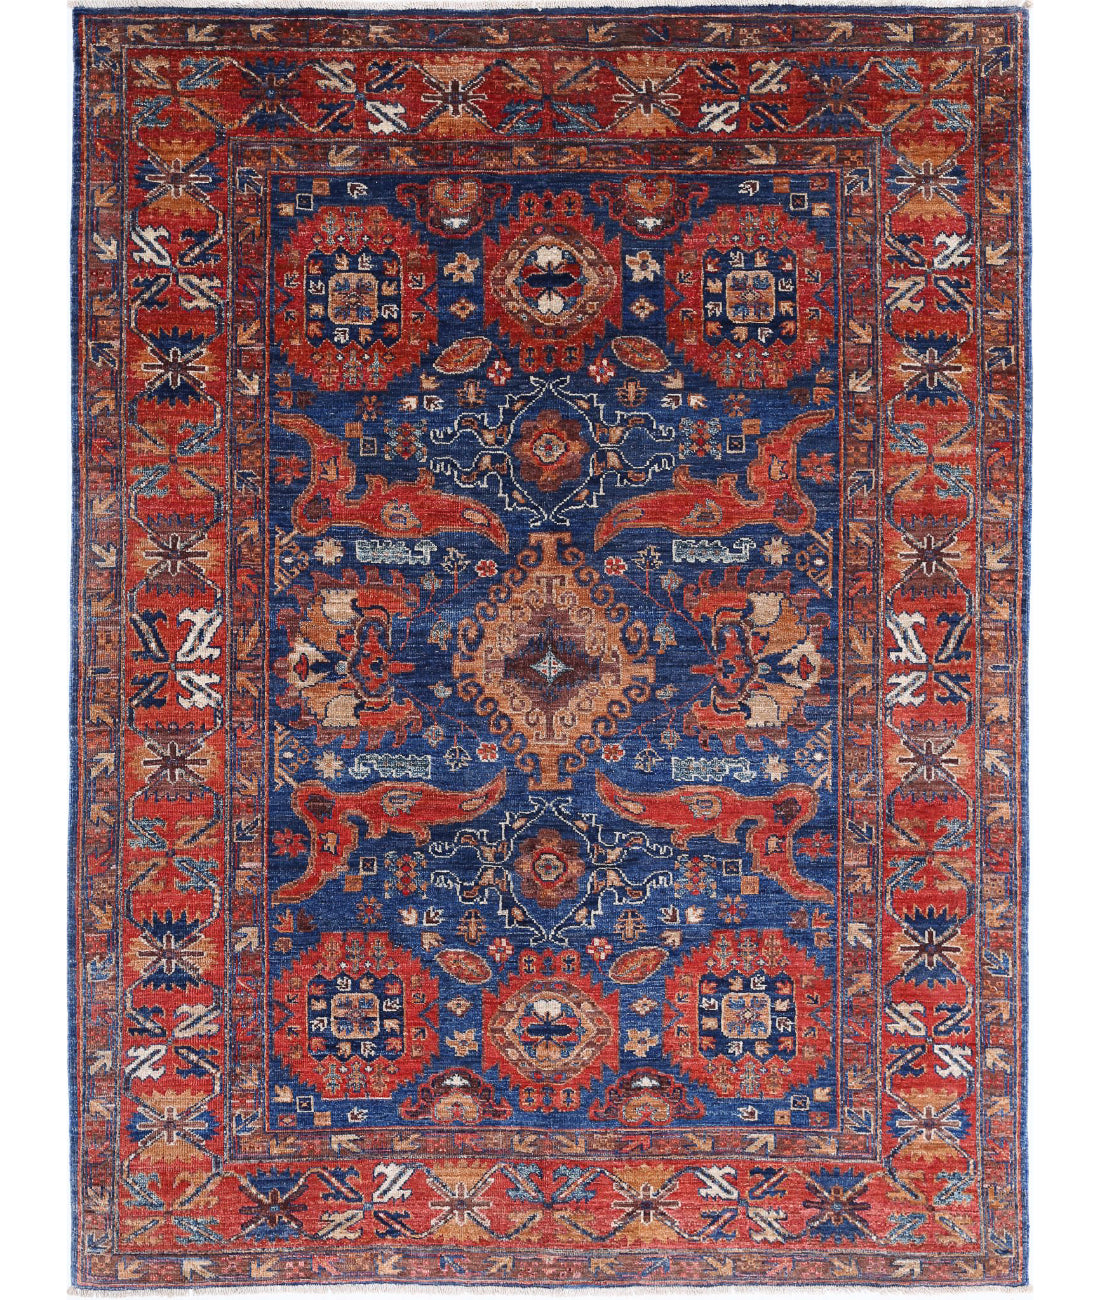 Hand Knotted Nomadic Caucasian Humna Wool Rug - 4&#39;11&#39;&#39; x 6&#39;9&#39;&#39; 4&#39;11&#39;&#39; x 6&#39;9&#39;&#39; (148 X 203) / Blue / Red